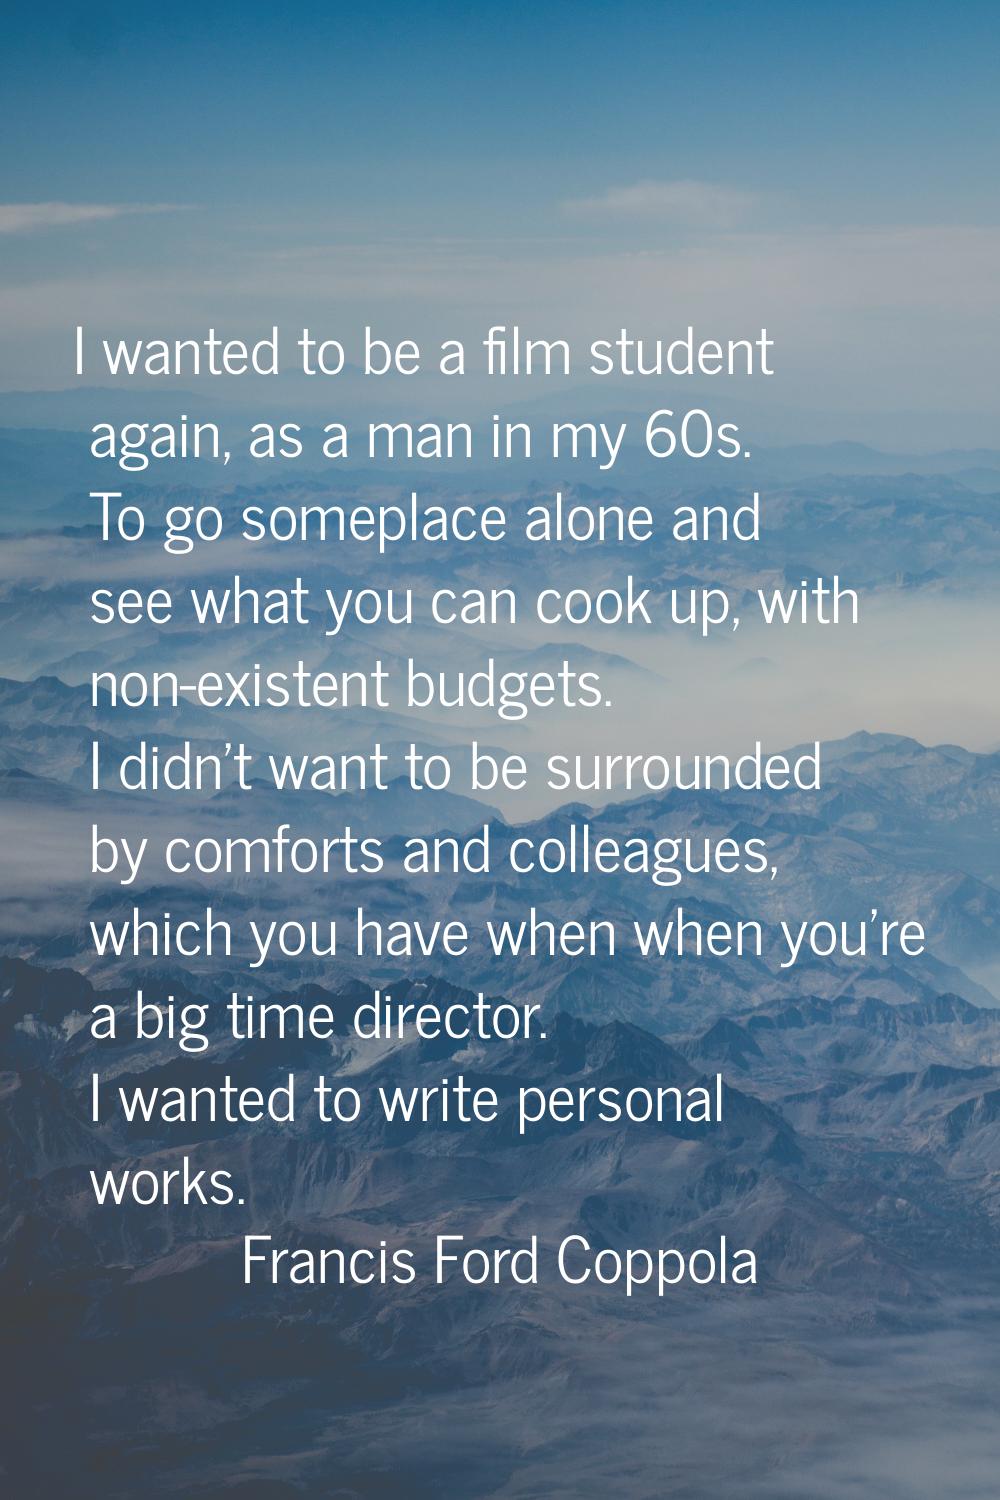 I wanted to be a film student again, as a man in my 60s. To go someplace alone and see what you can